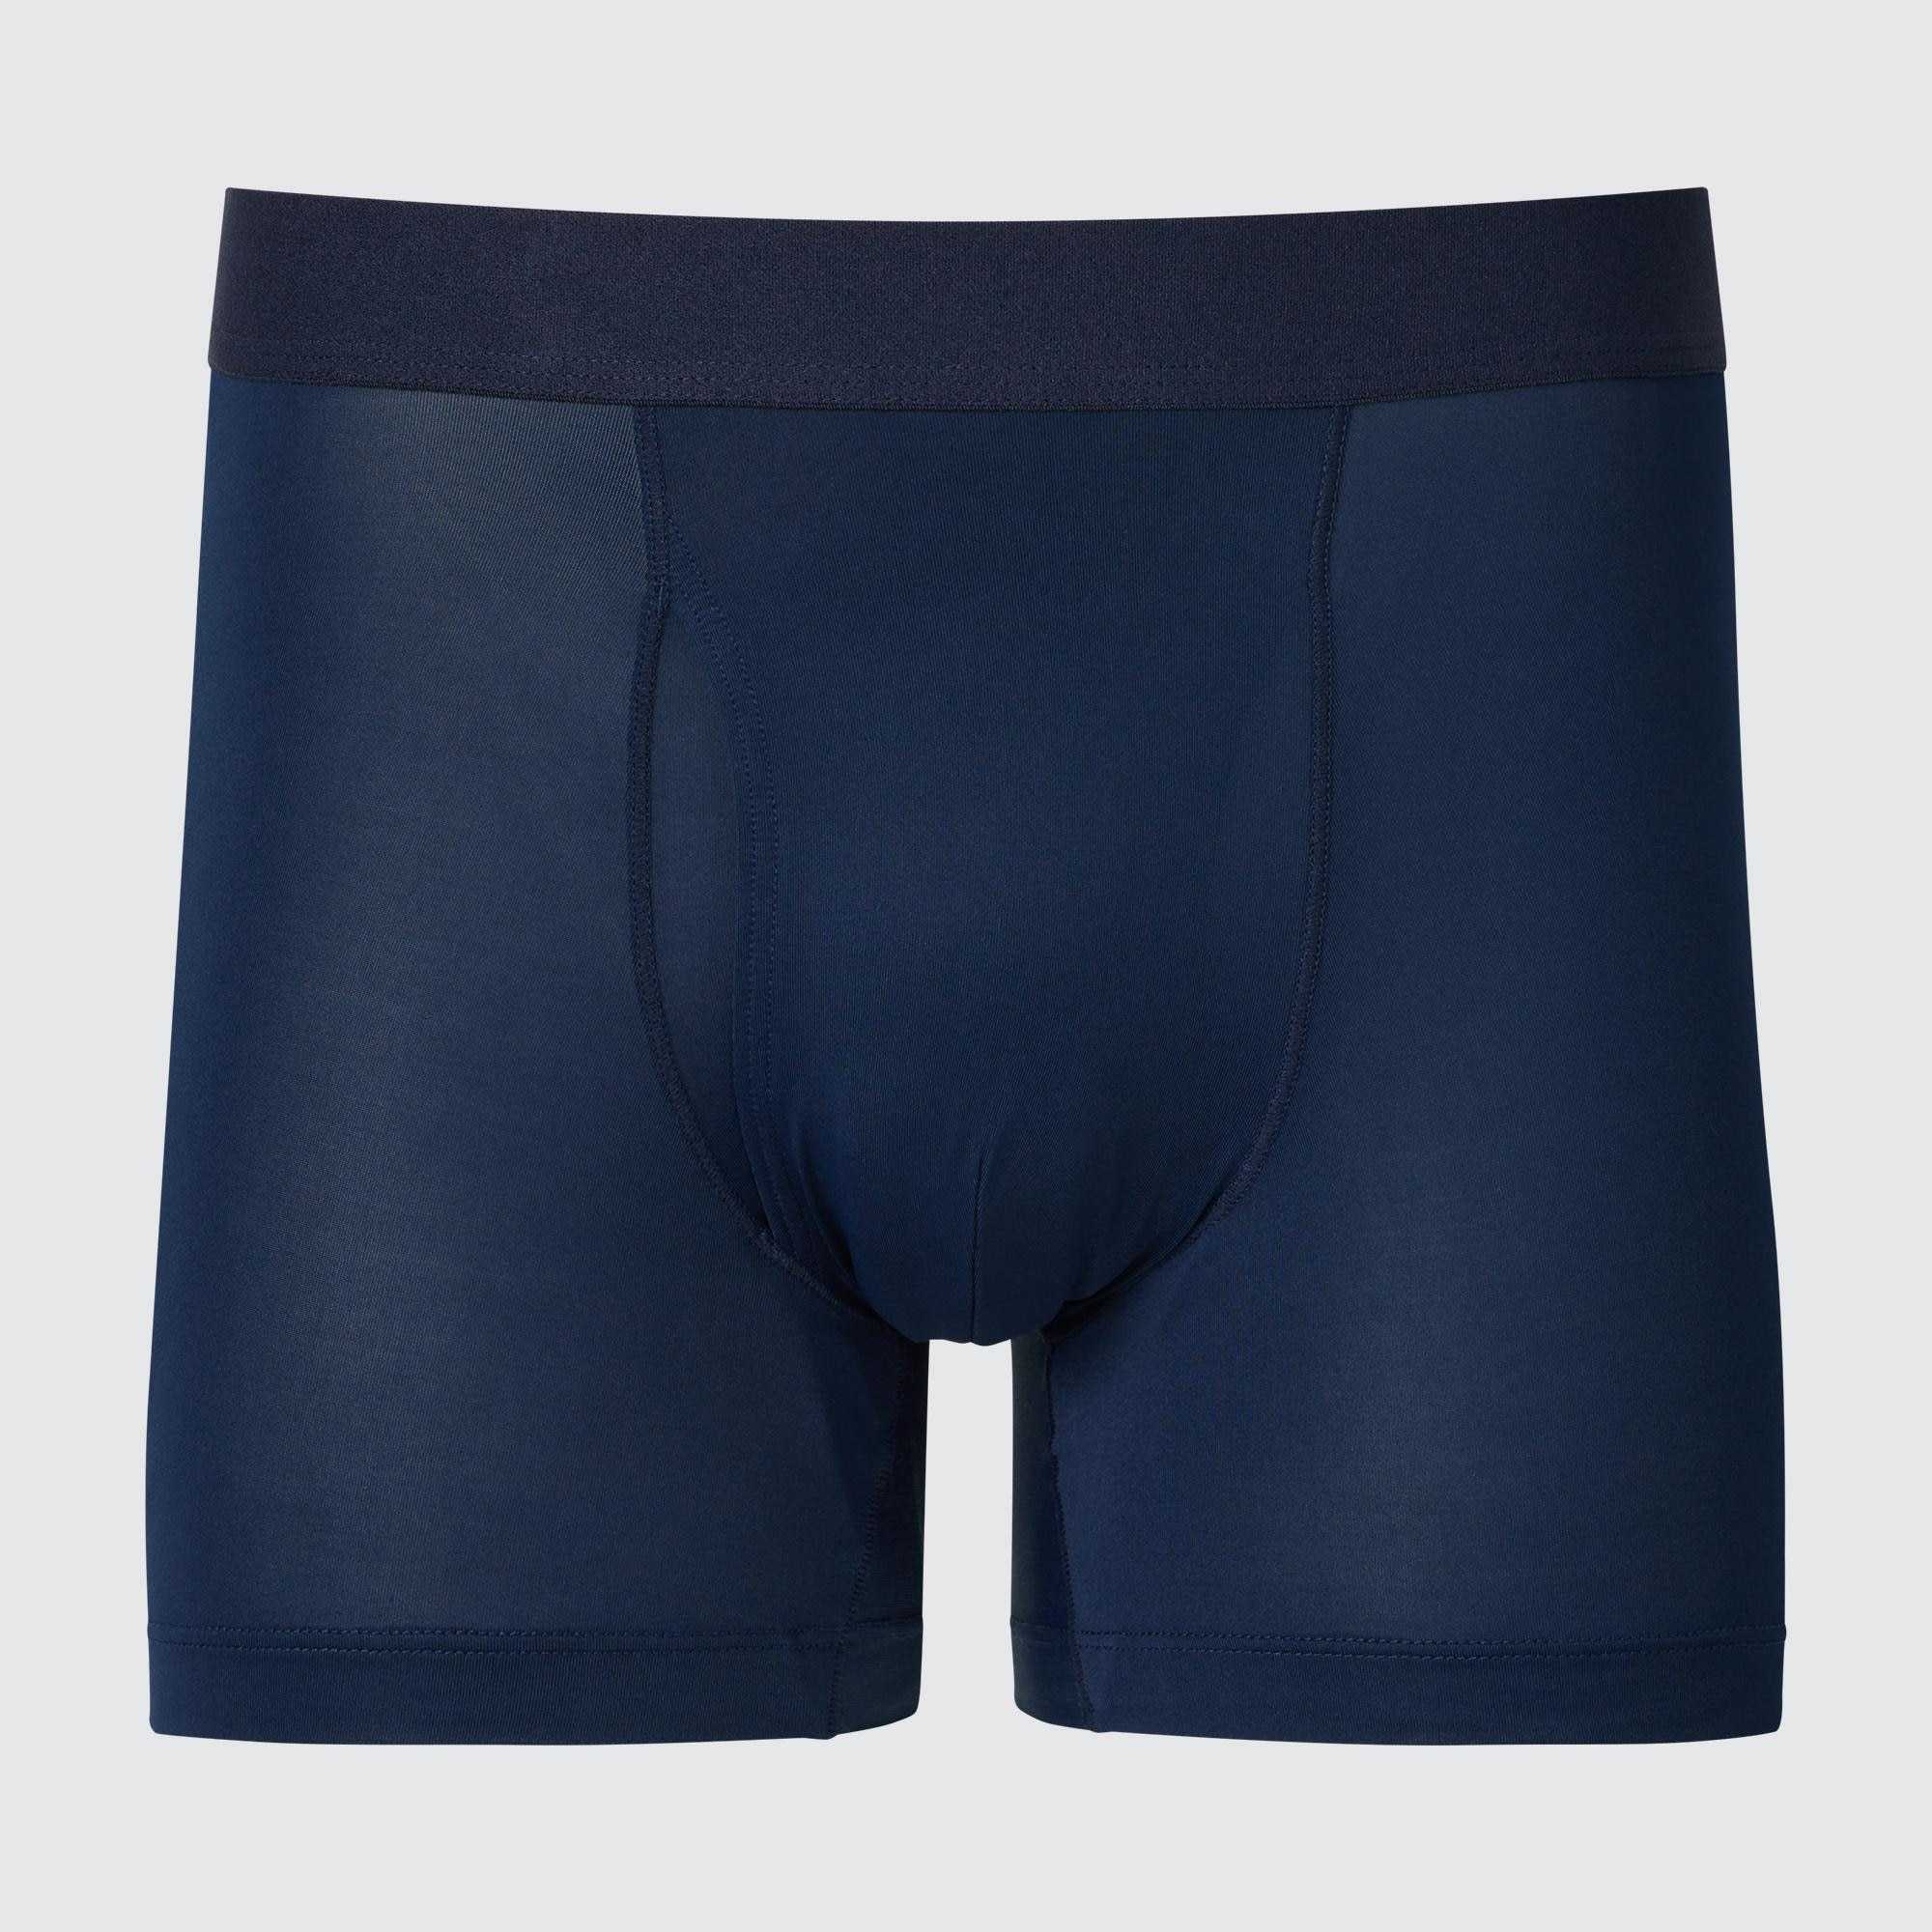 A Look Into the Best Mens Underwear for Hot Weather